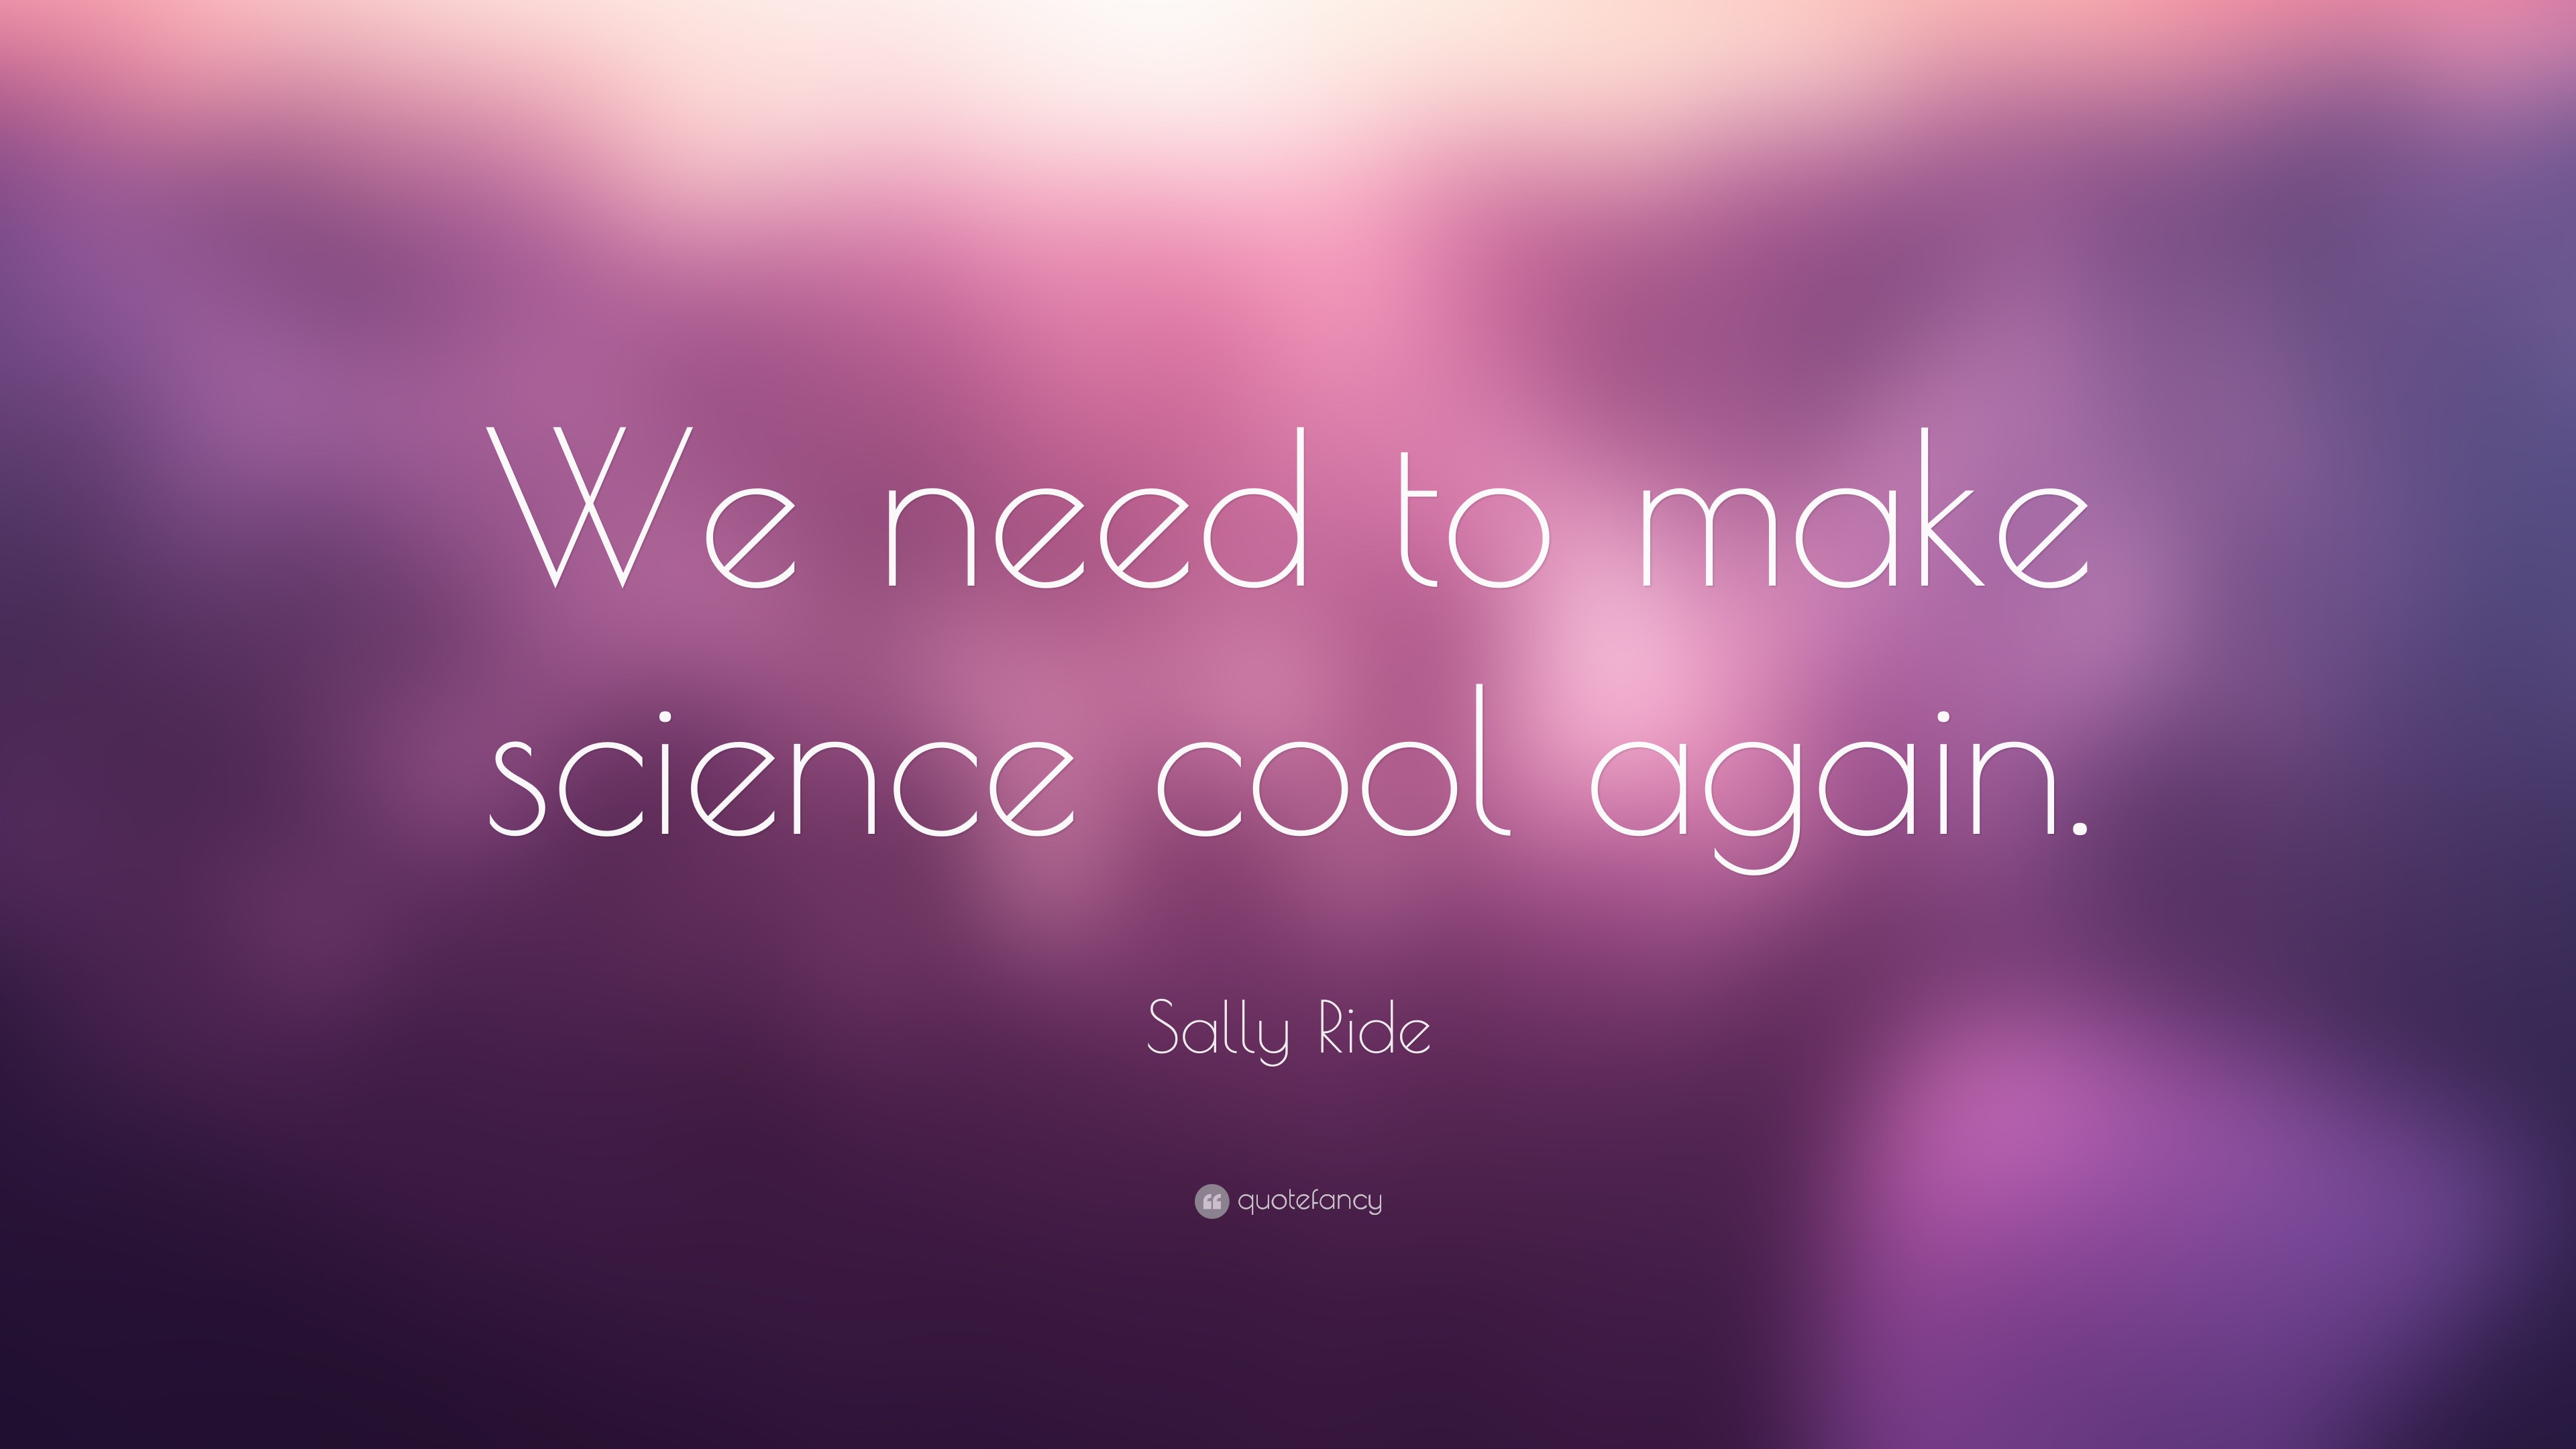 Sally Ride Quote: “We need to make